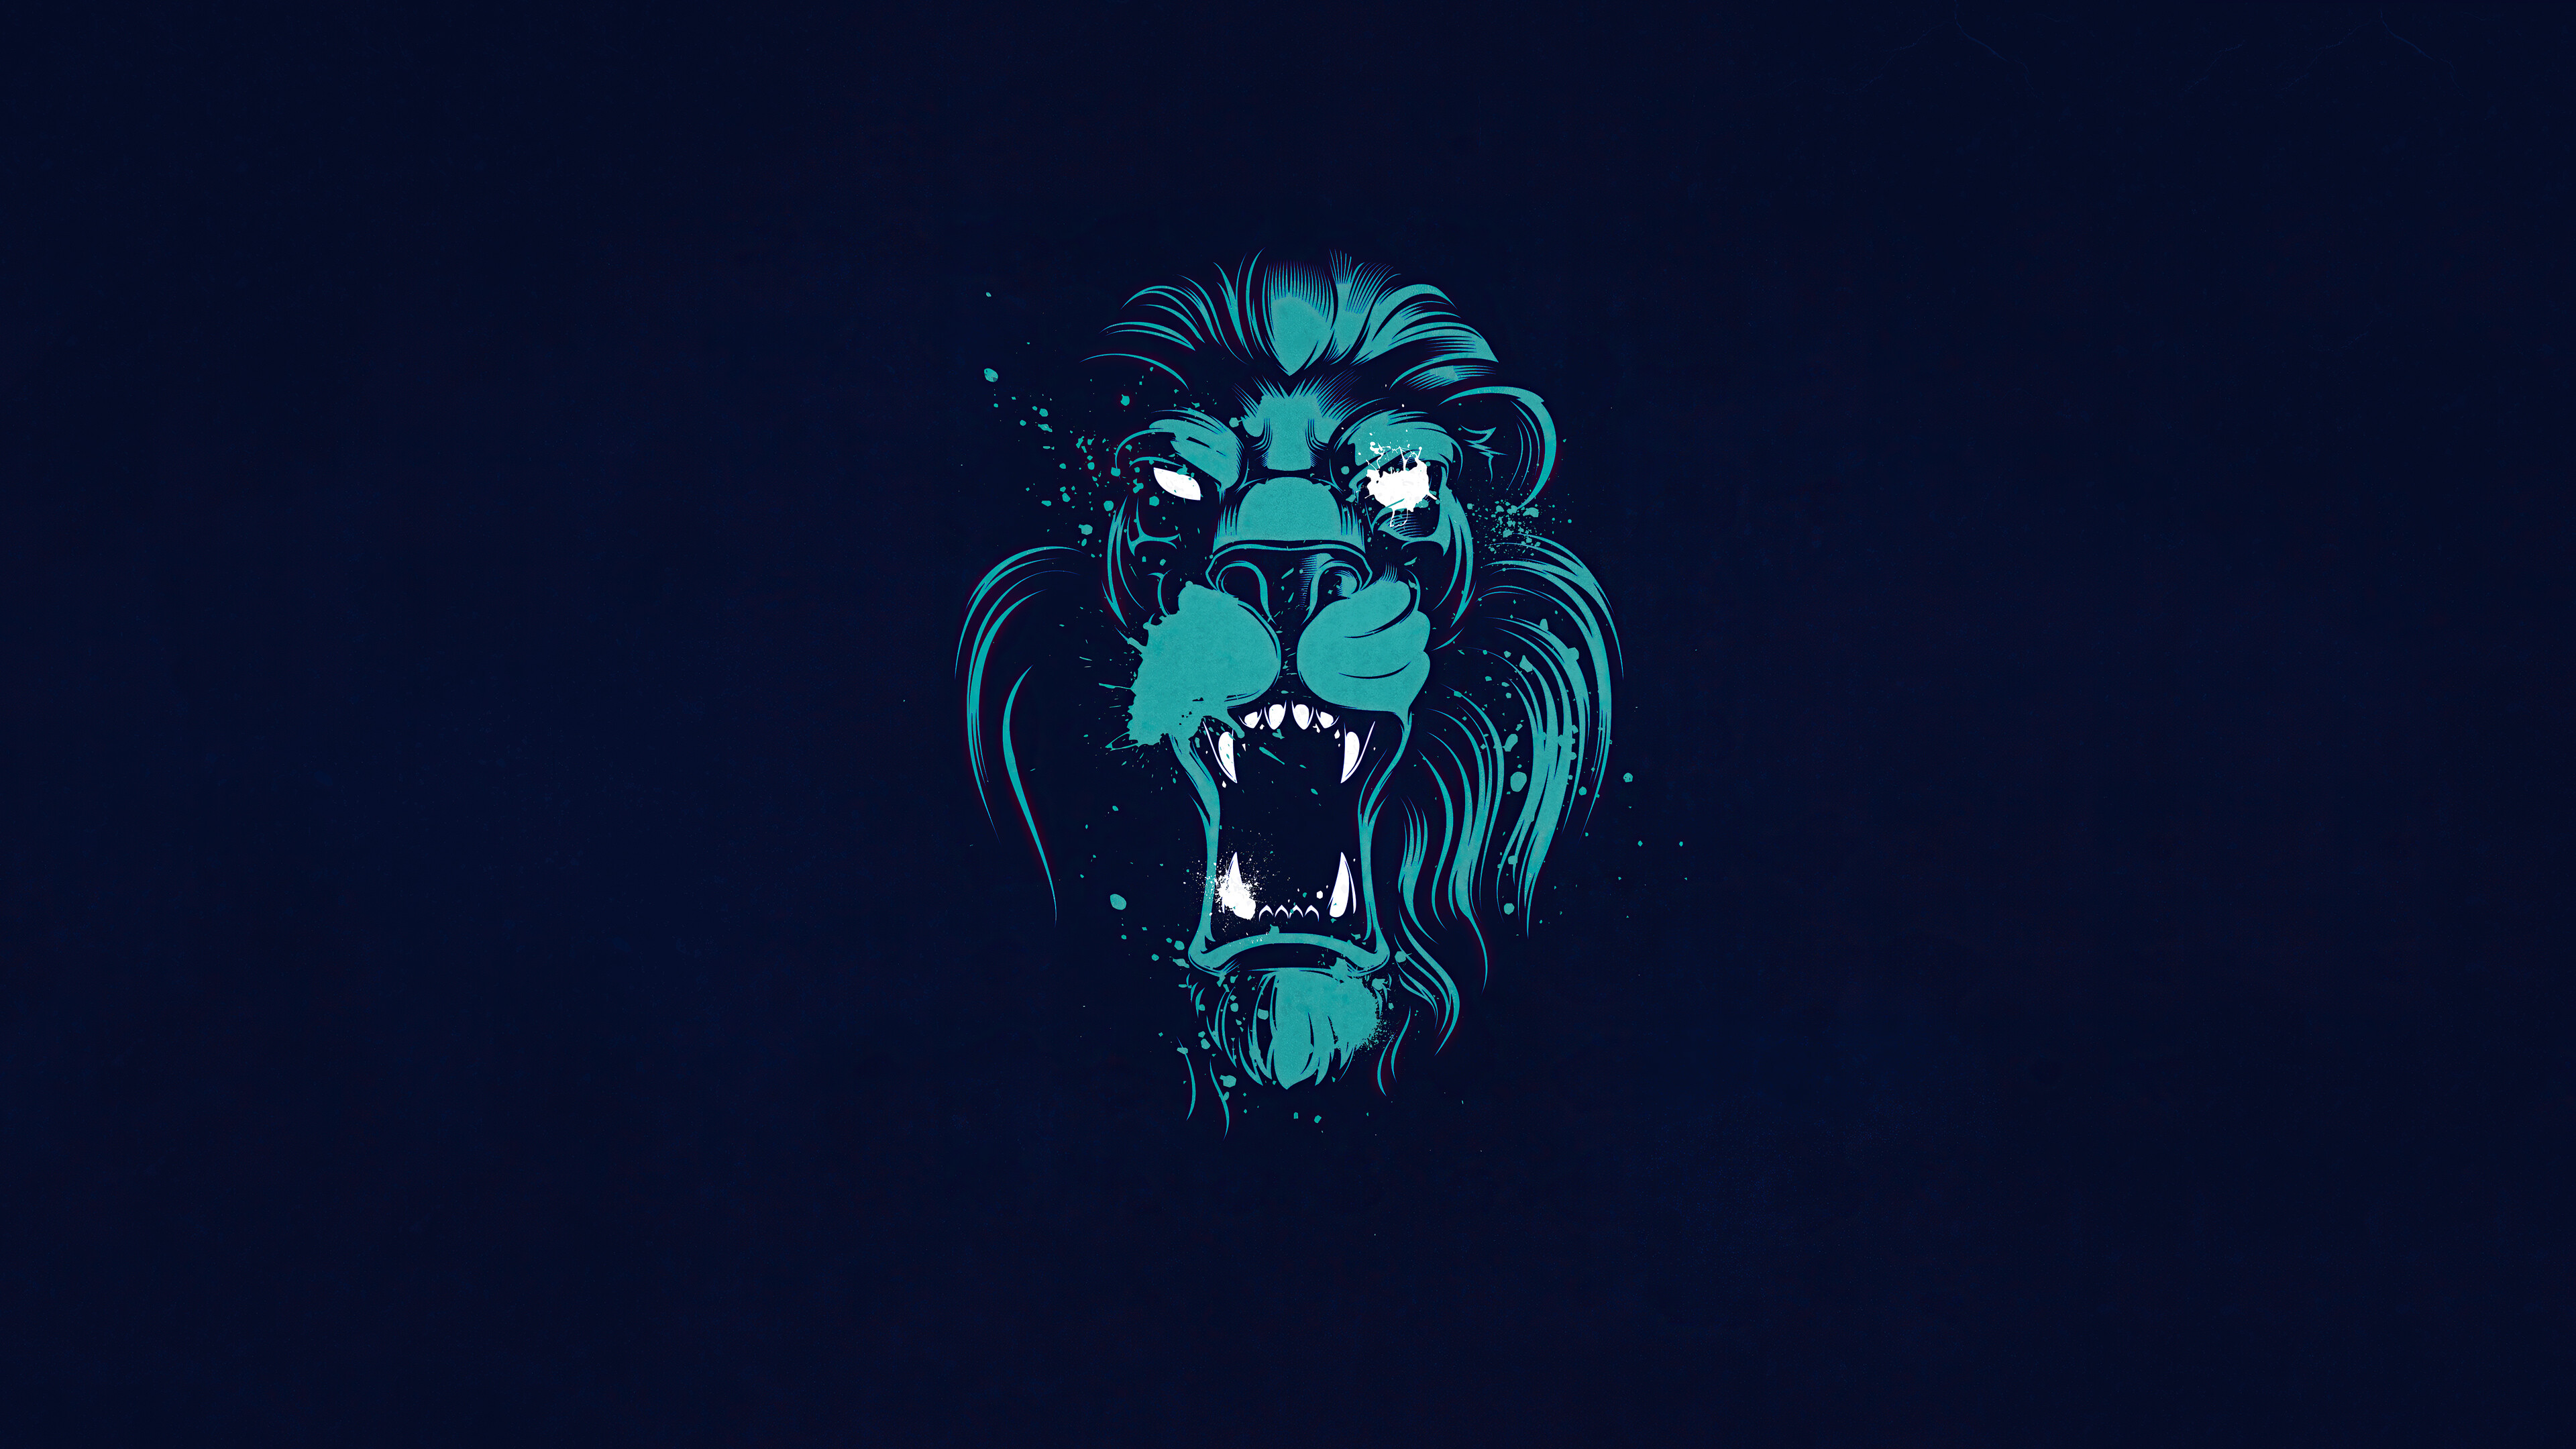 Lion: The Panthera lineage is estimated to have genetically diverged from the common ancestor of the Felidae, Illustration, Minimalistic. 3840x2160 4K Background.